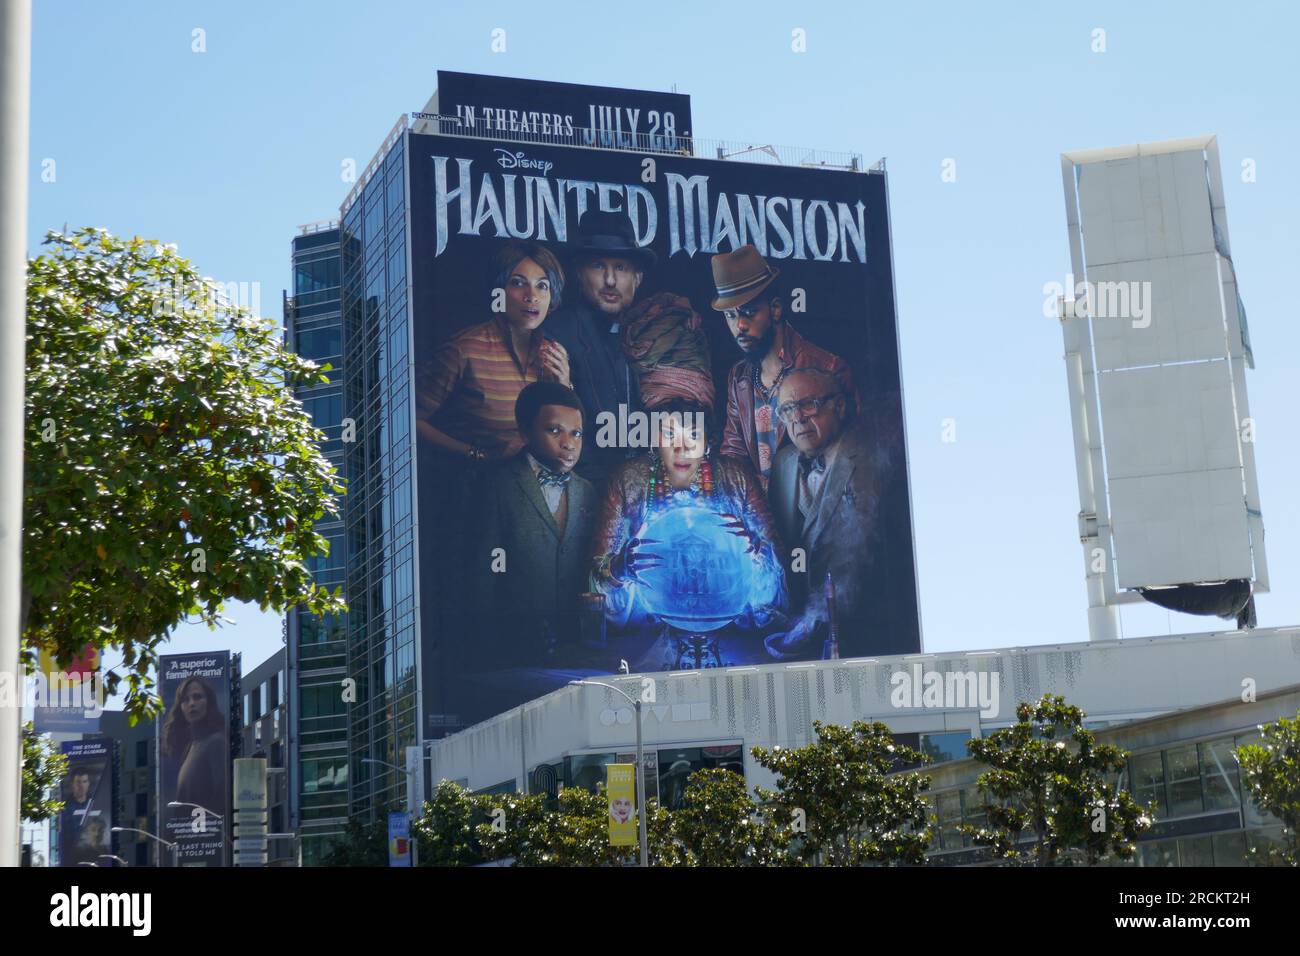 Los Angeles, California, USA 13th July 2023 Disney Haunted Mansion Billboard on July 13, 2023 in Los Angeles, California, USA. Photo by Barry King/Alamy Stock Photo Stock Photo